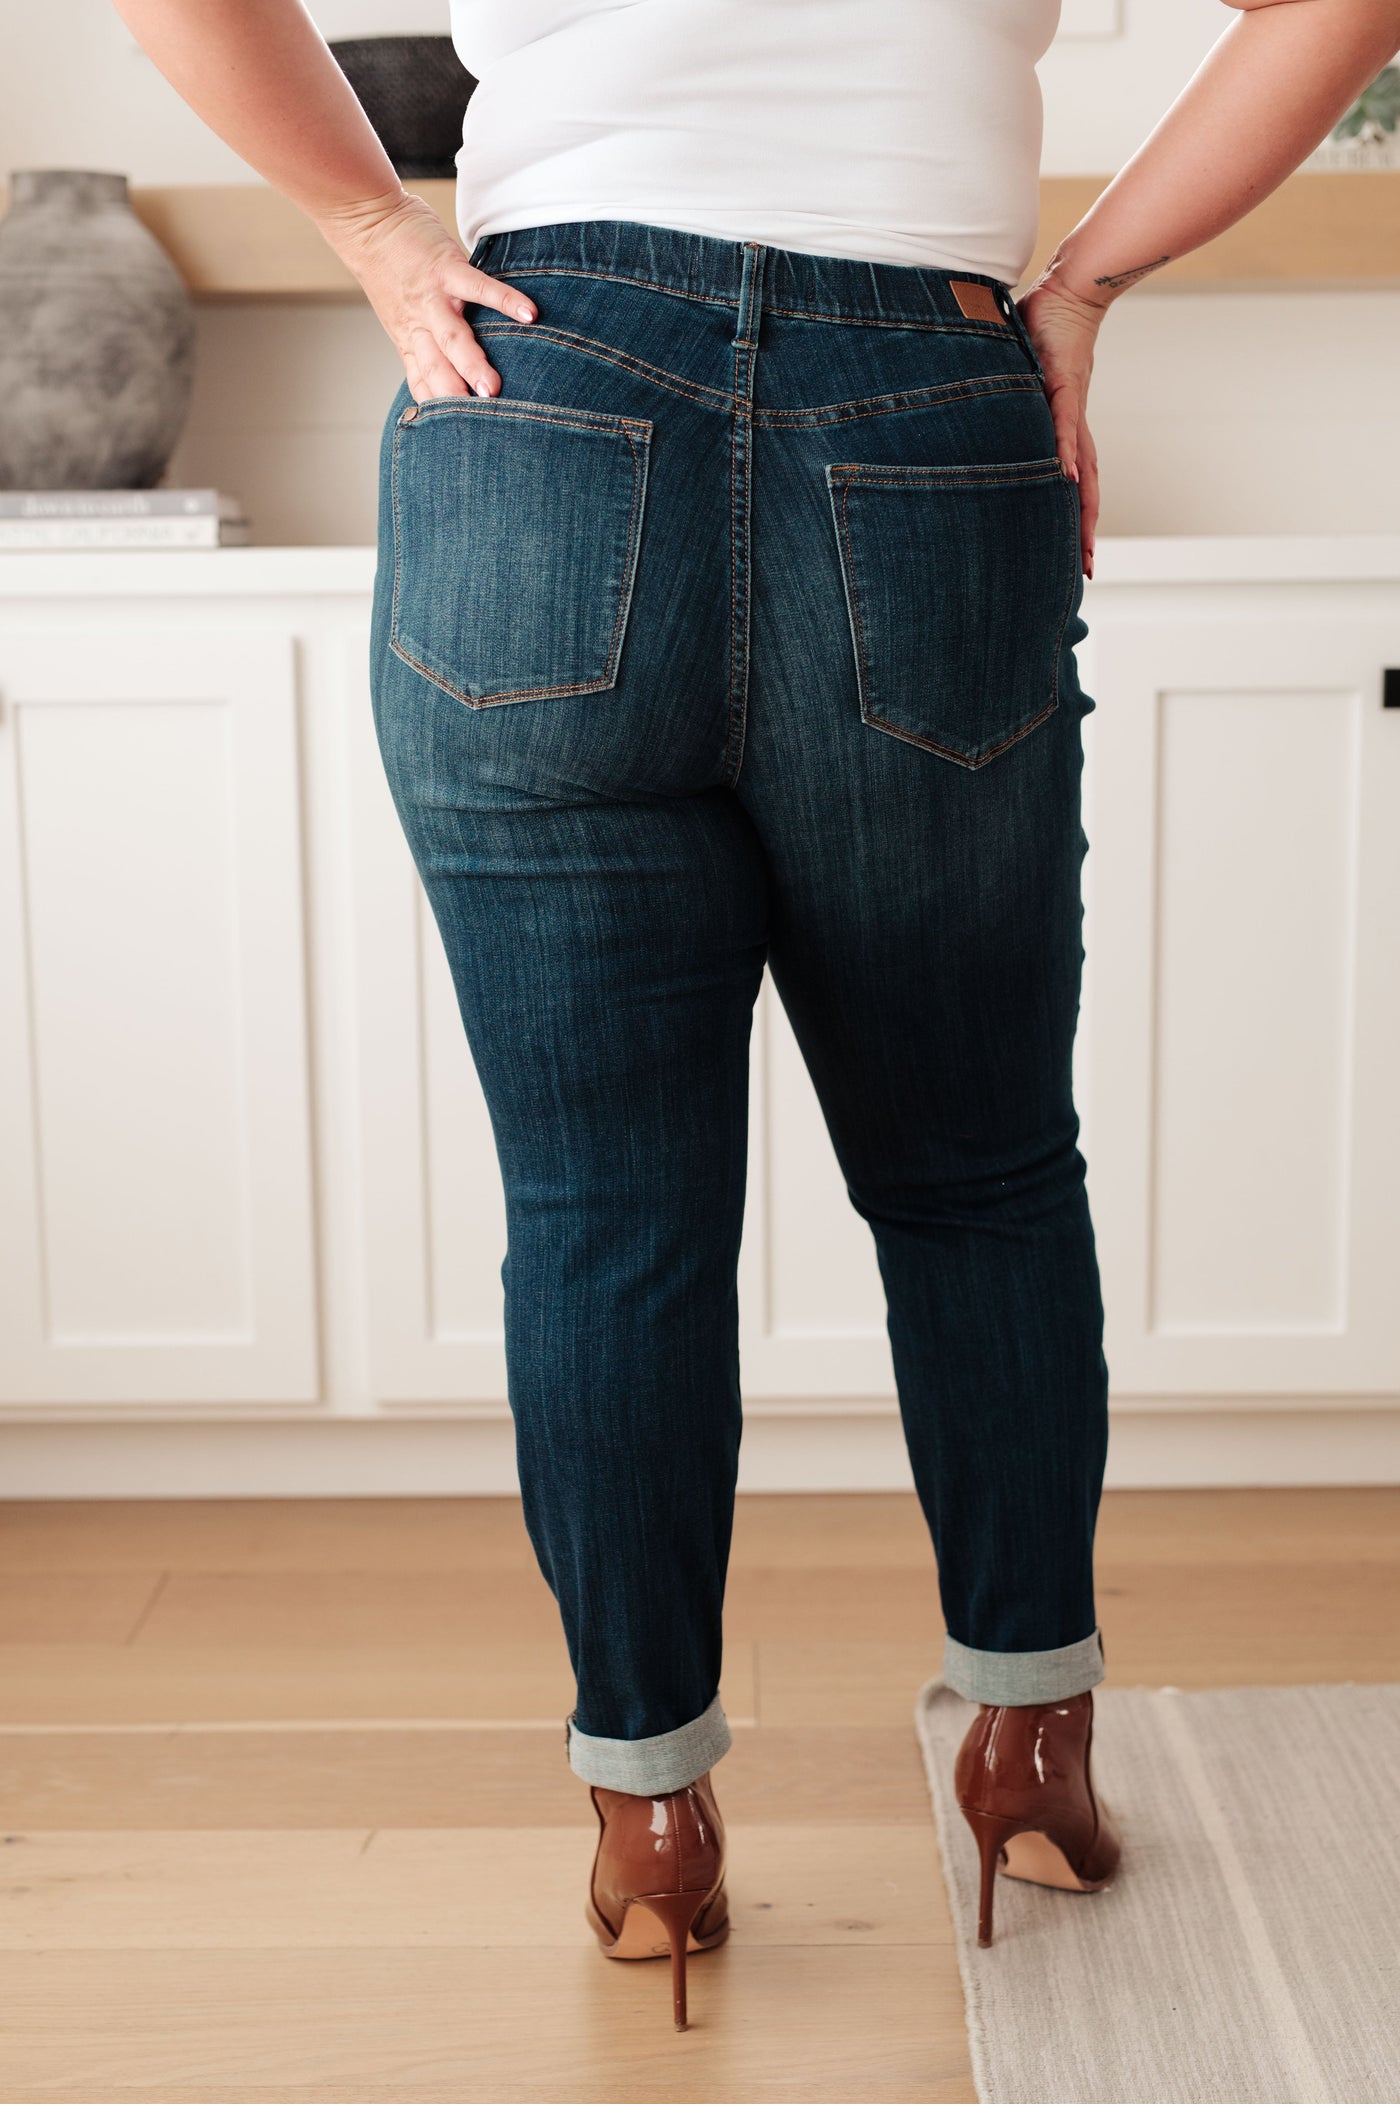 The Rowena High Rise Pull On Double Cuff Slim Jeans From Judy Blue provide sleek and slimming fit with faux front pockets and an optional rolled cuff.